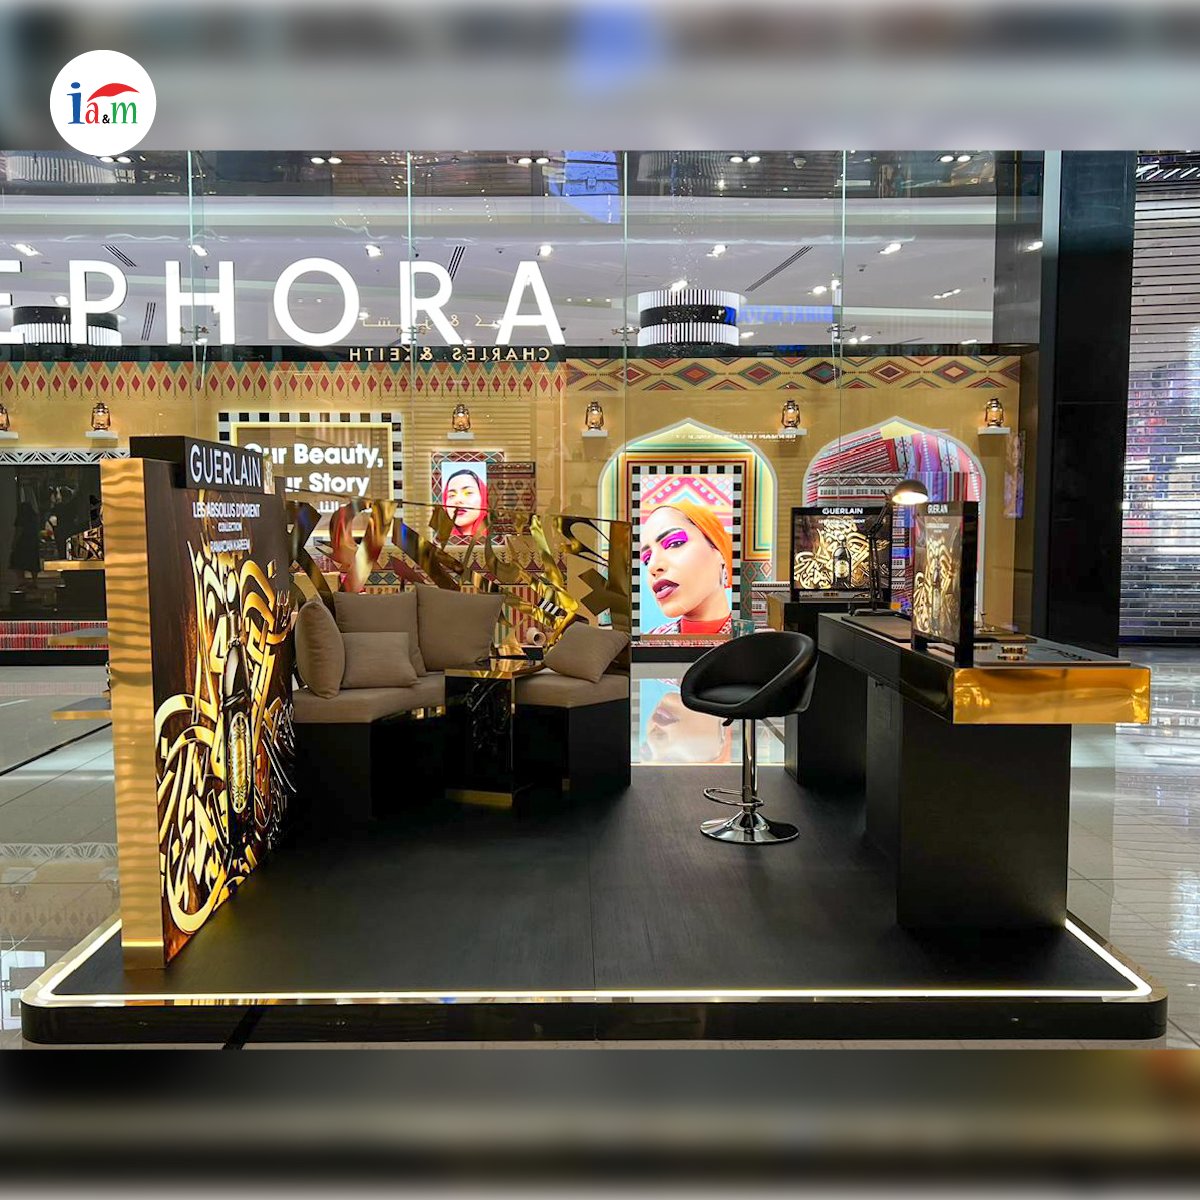 Check out our latest installation at Sephora Dubai Mall for Guerlain! We're proud to have installed this stunning 3x3 Mall Podium, showcasing Guerlain's luxurious beauty products. 😍🛍️ #Guerlain #SephoraDubaiMall #BeautyProducts #LuxuryBrands #RetailDisplays